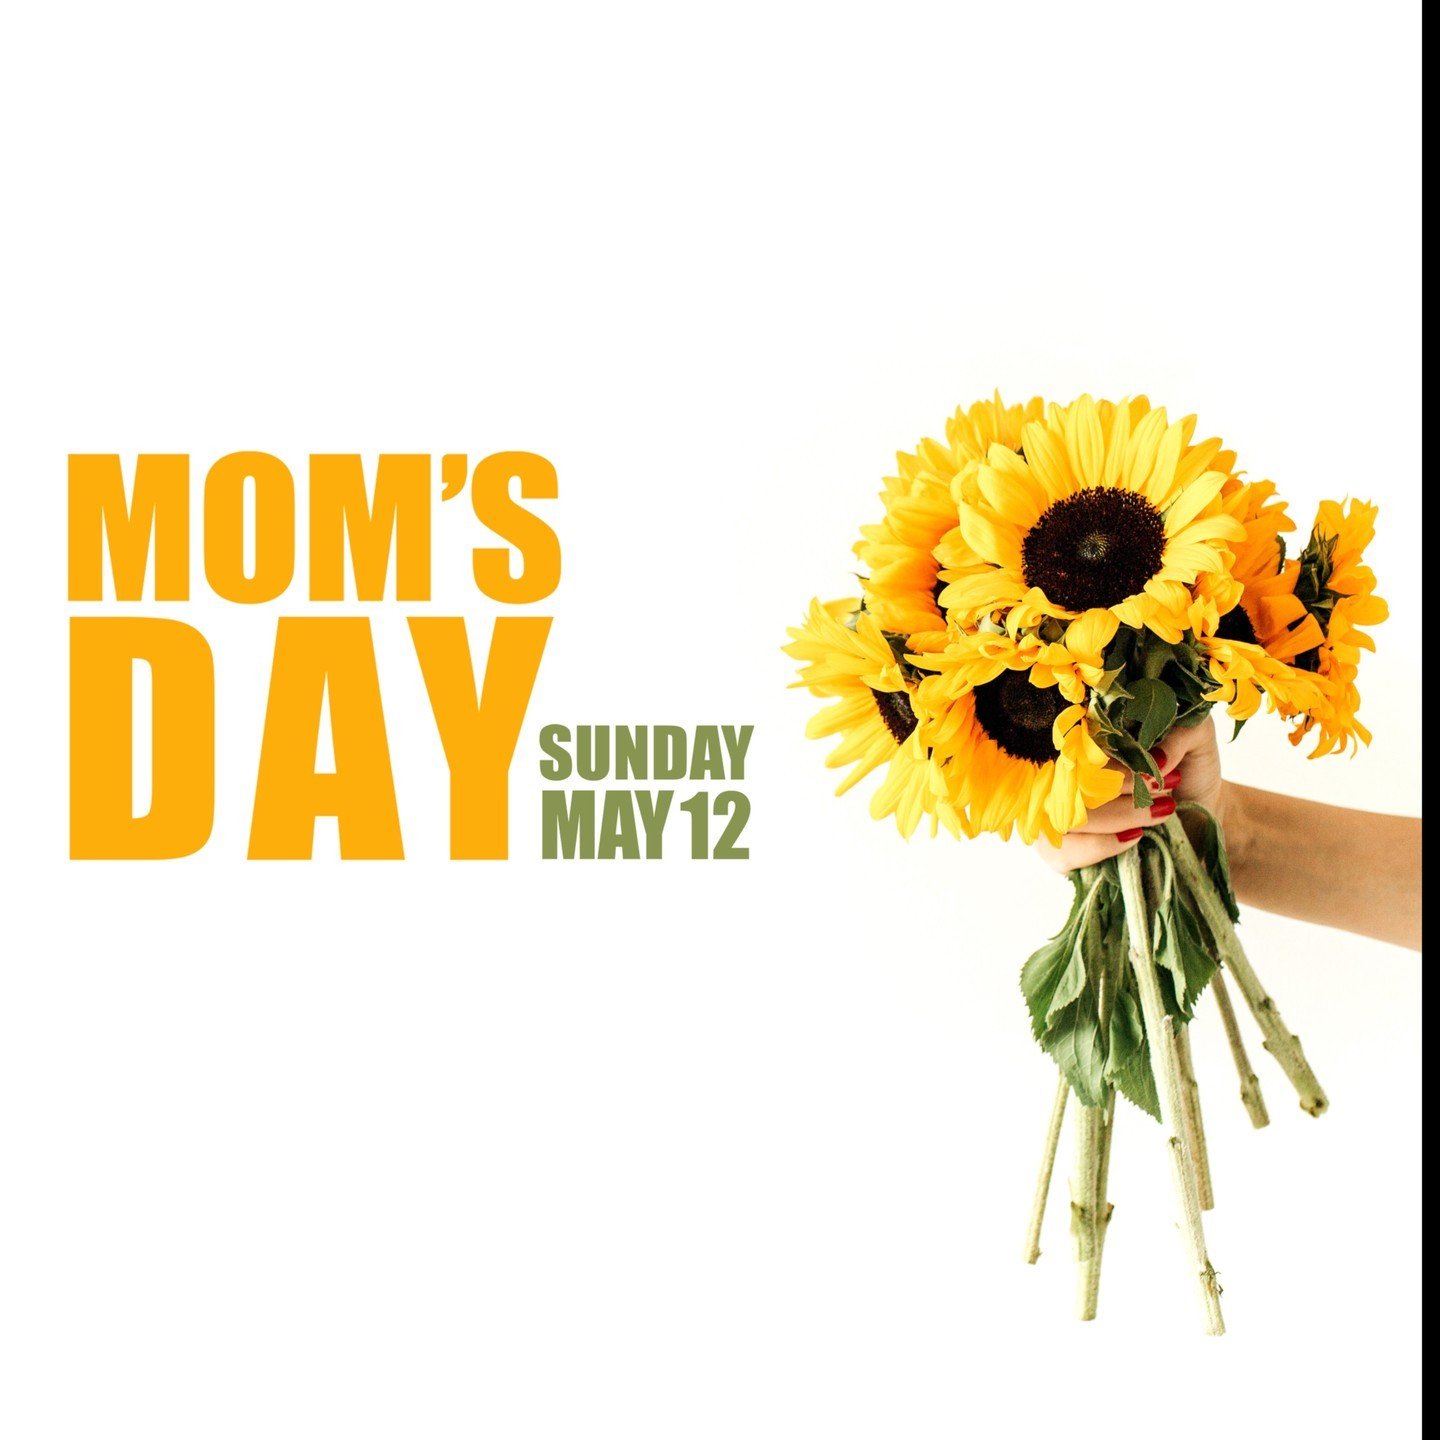 🌻 Treat Mom to an unforgettable dining experience this Mother's Day! 
✨  Reserve your table now to ensure a delightful celebration for the most important woman in your life! 
Book on our website or on Yelp today. #MothersDay #CelebrateMom #ReserveNo